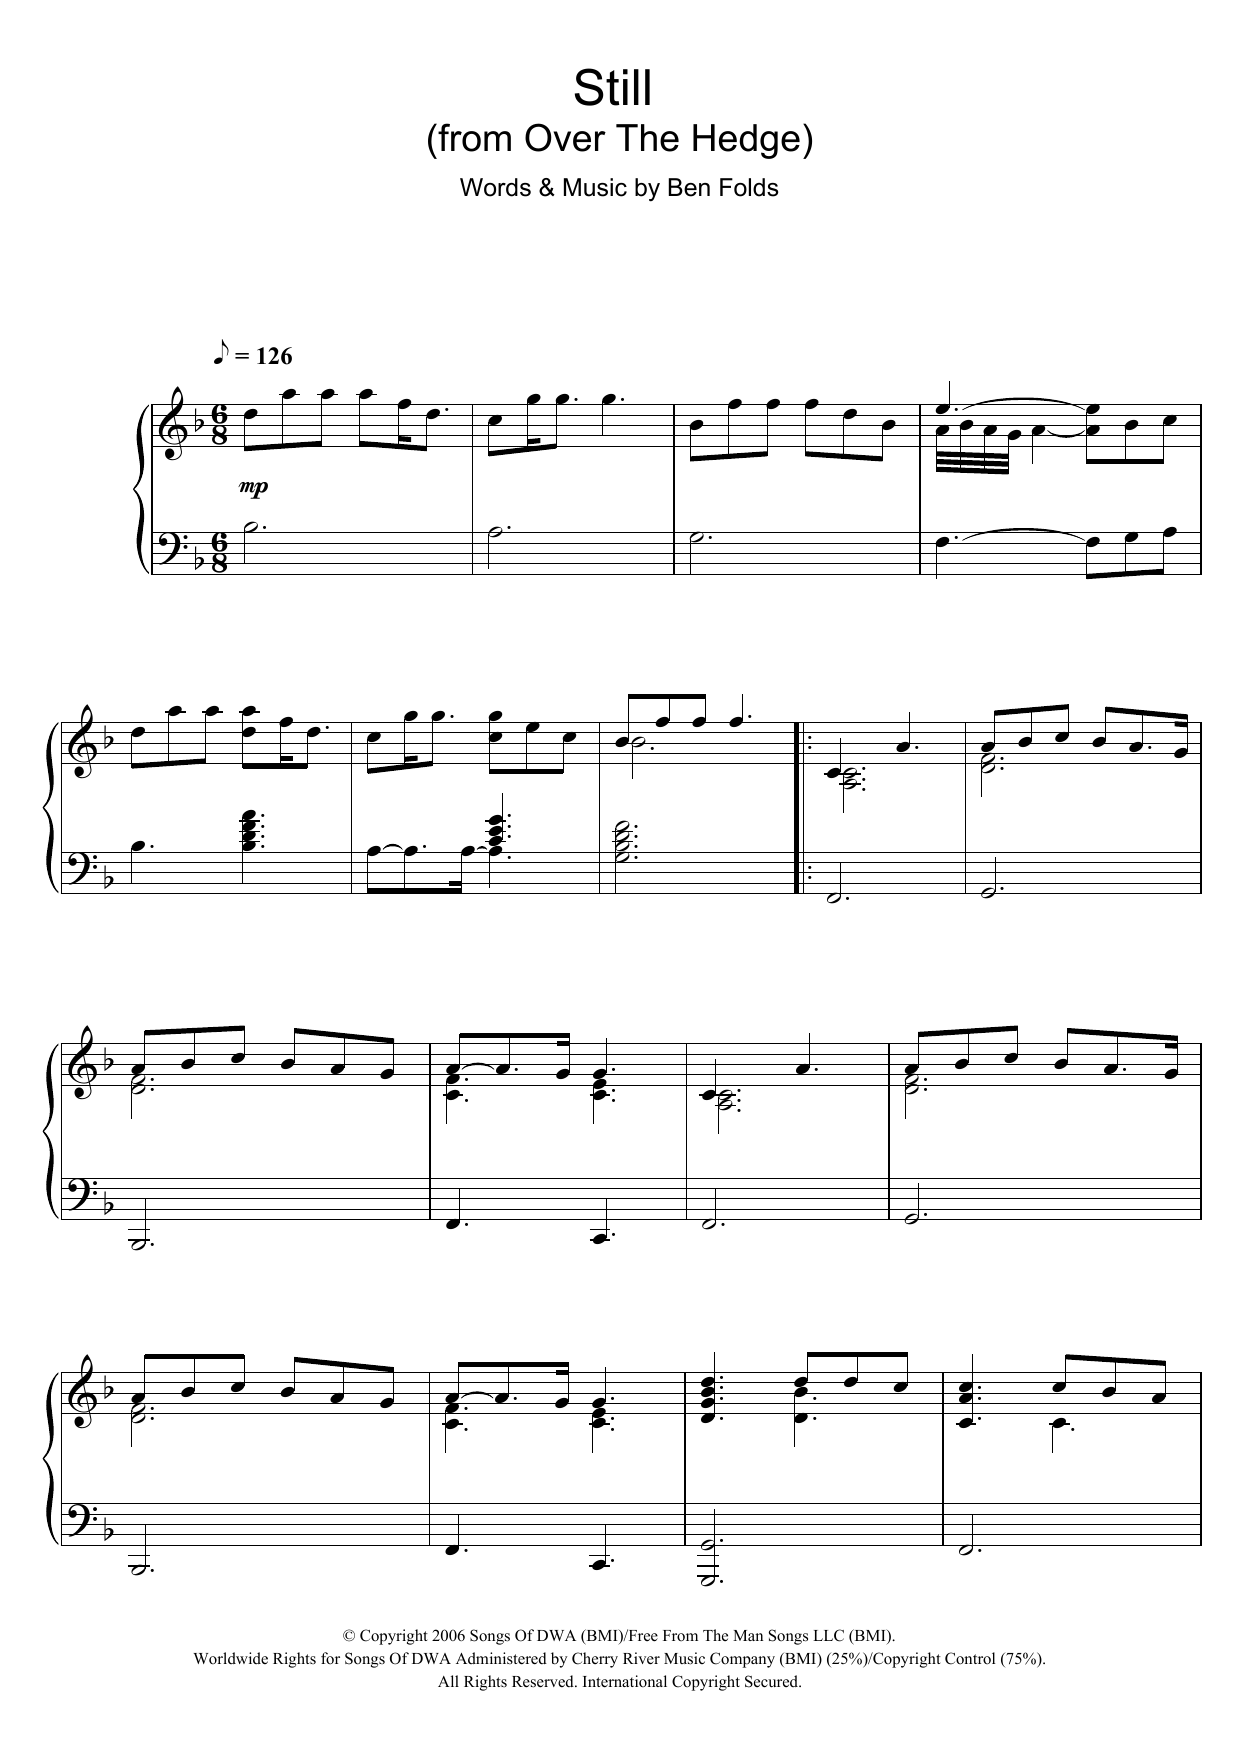 Download Ben Folds Still (from 'Over The Hedge') Sheet Music